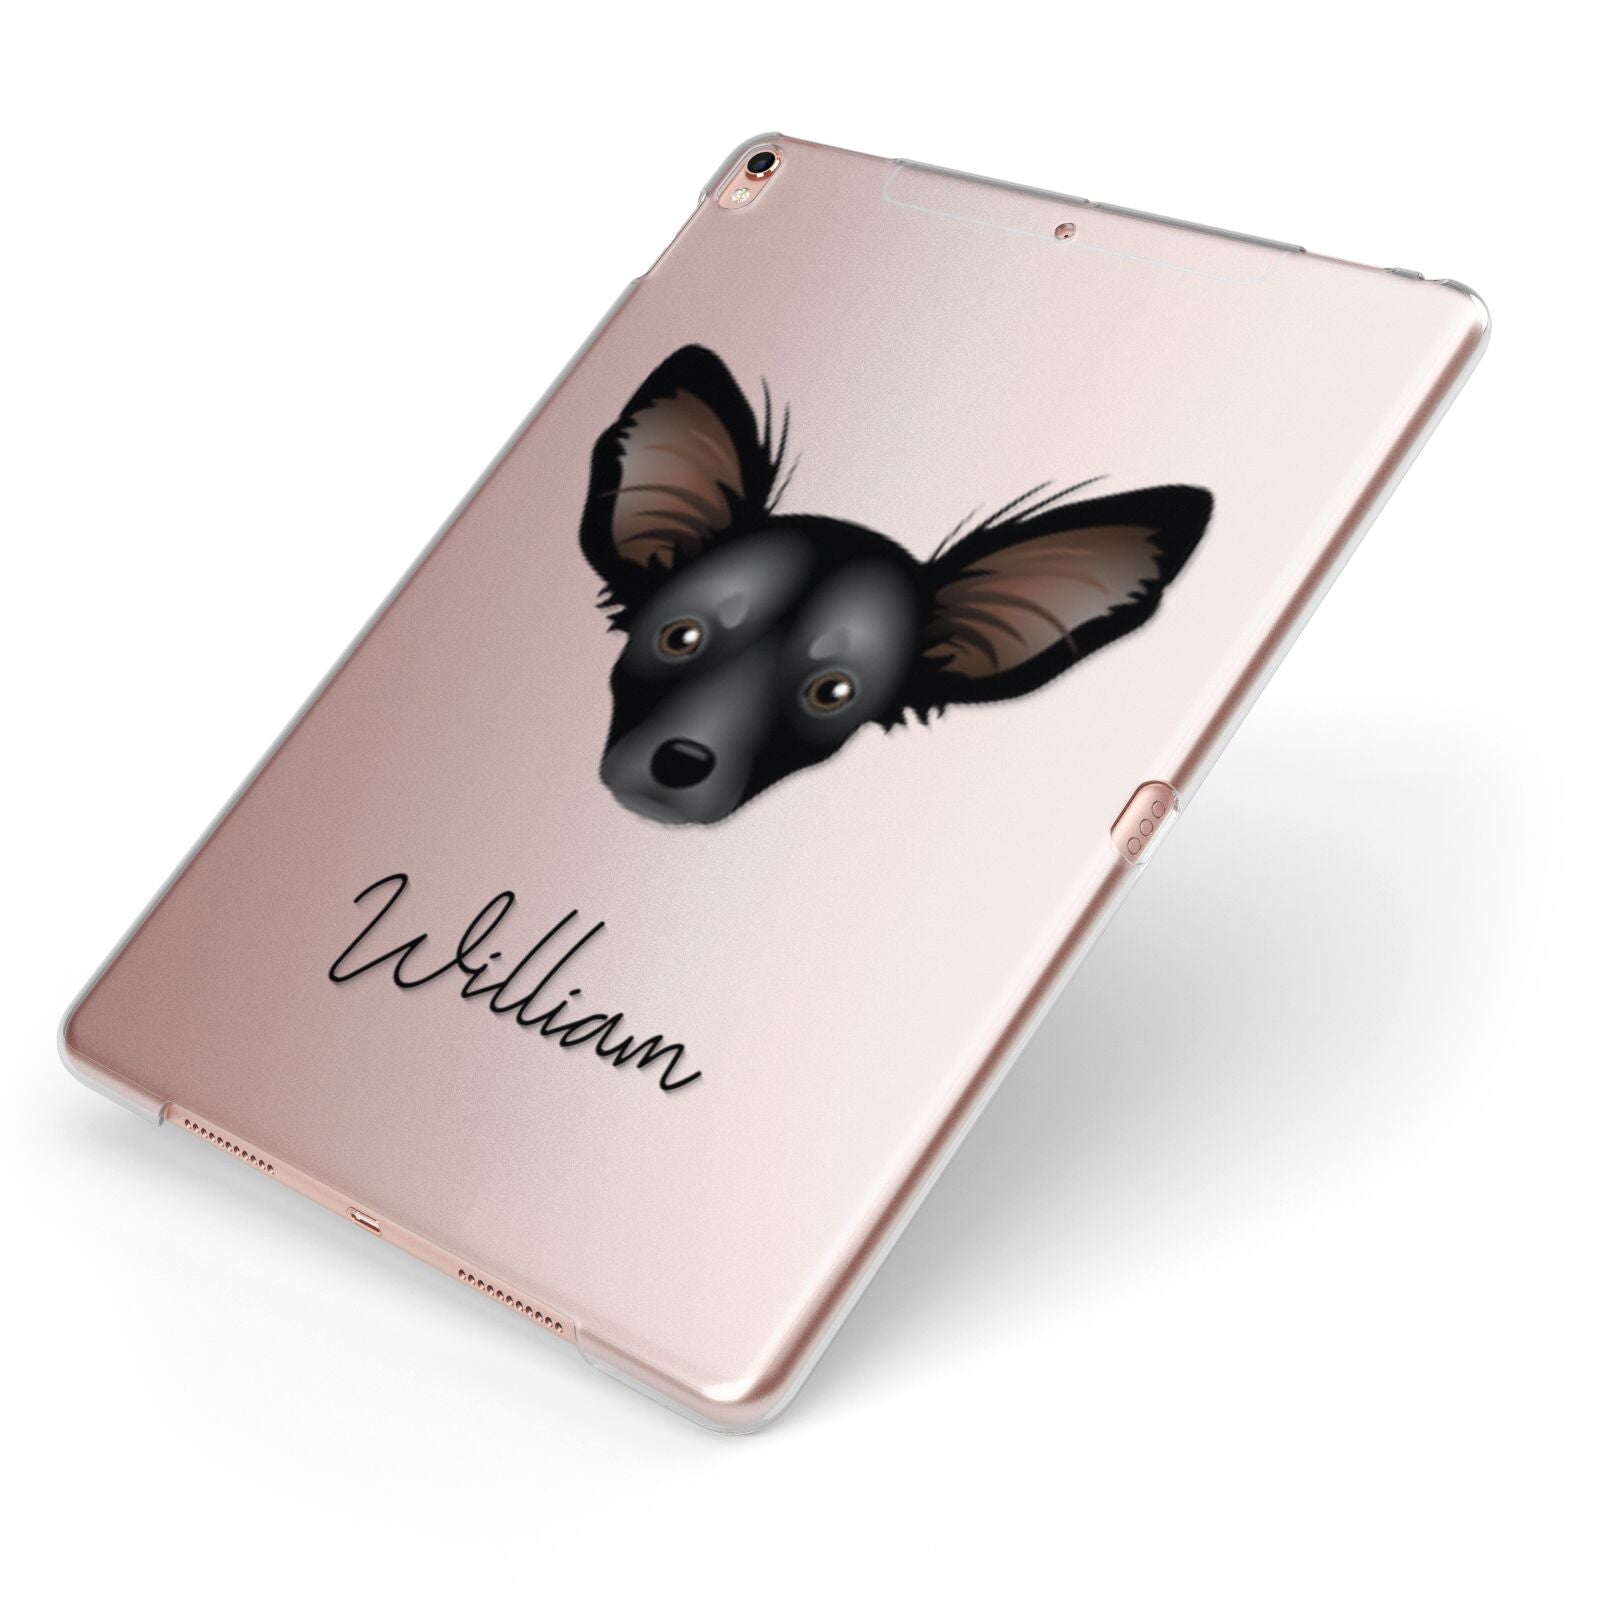 Russian Toy Personalised Apple iPad Case on Rose Gold iPad Side View